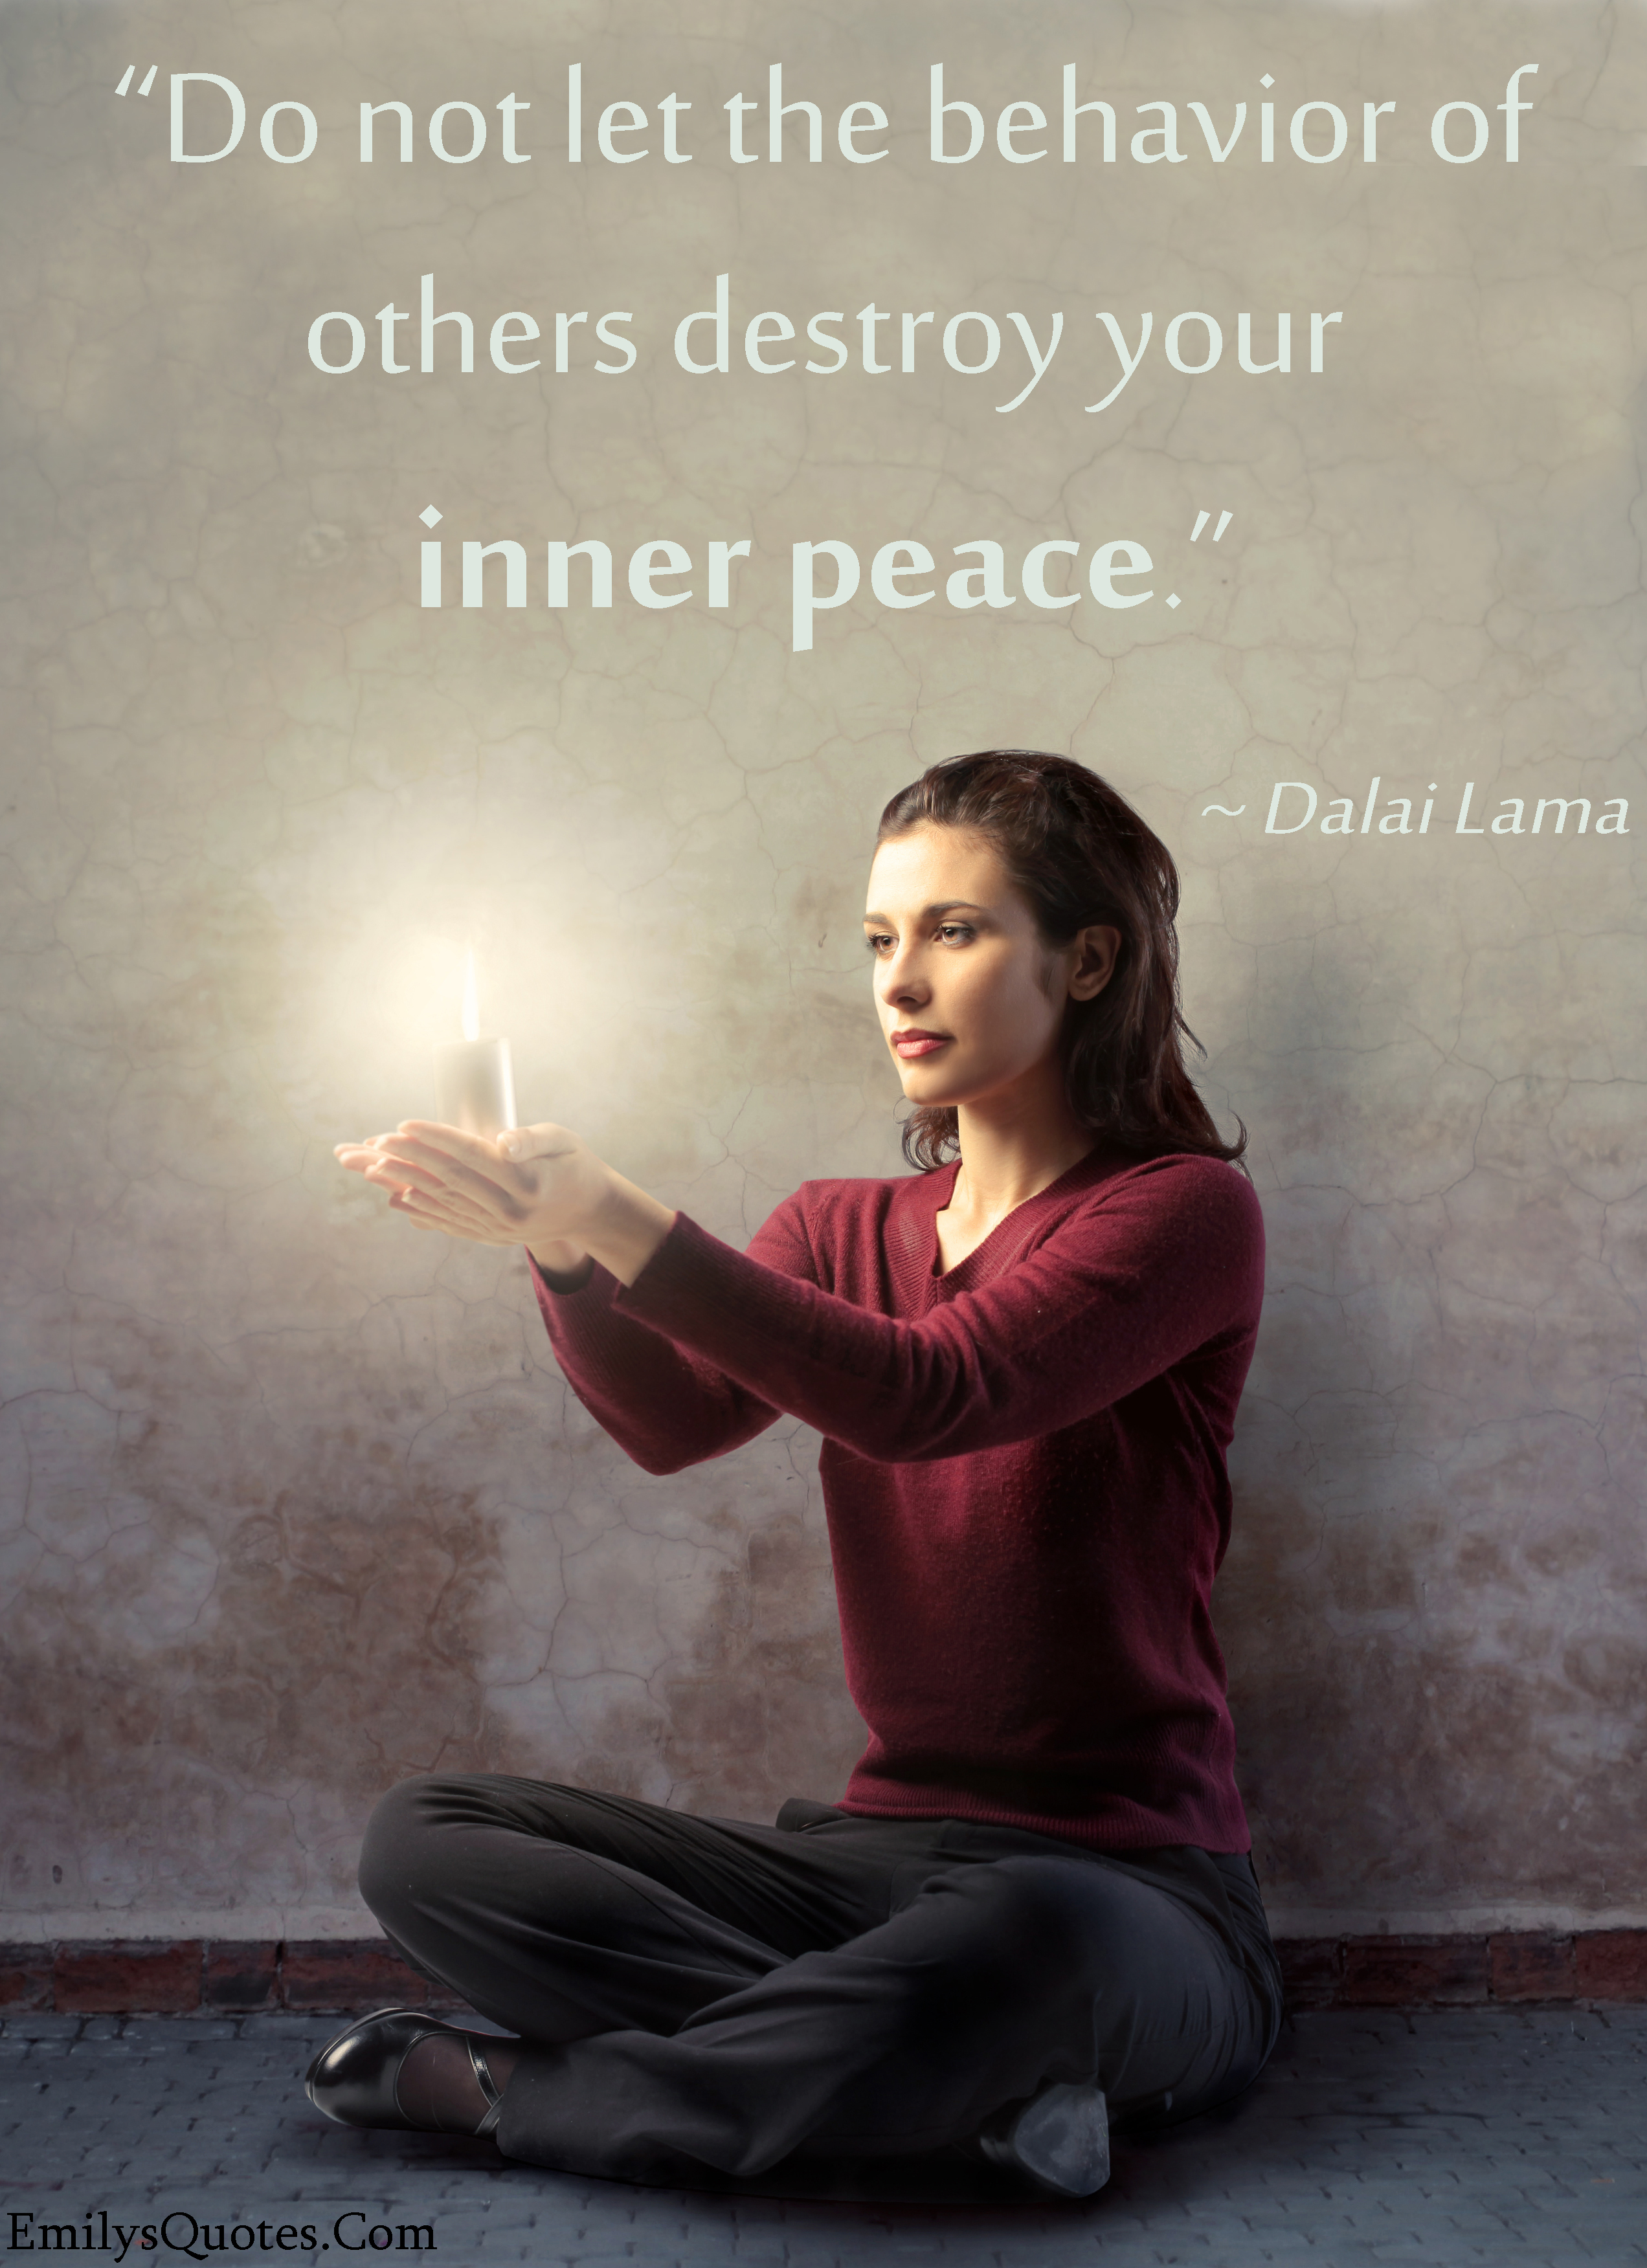 Do not let the behavior of others destroy your inner peace | Popular